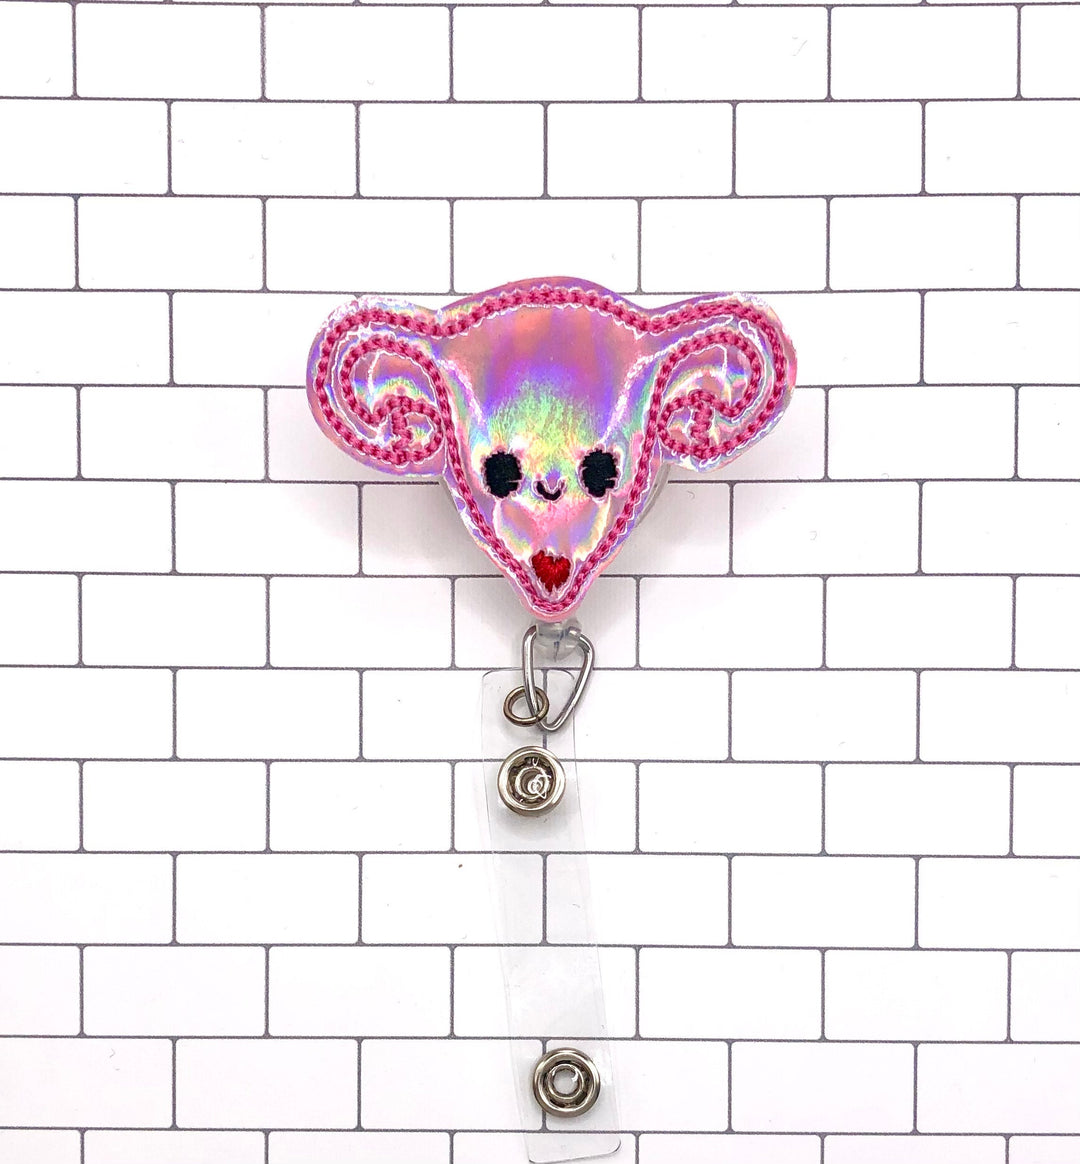 Uterus Badge Reel, Labor and Delivery Badge Reel, Thank You Gifts